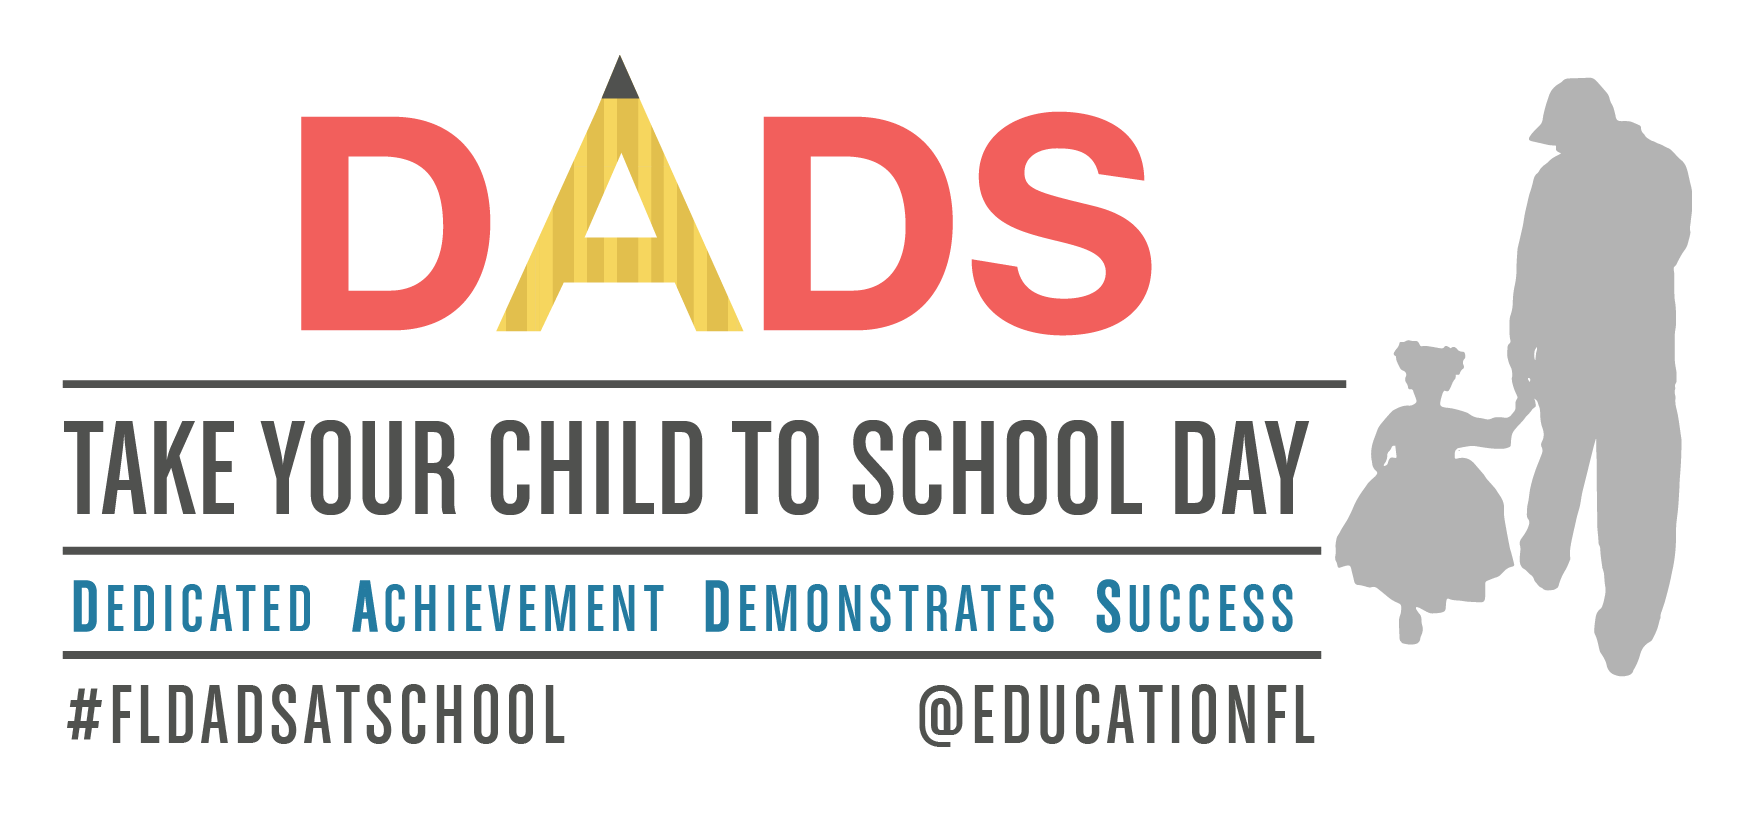 Dads Day - Take your child to school day